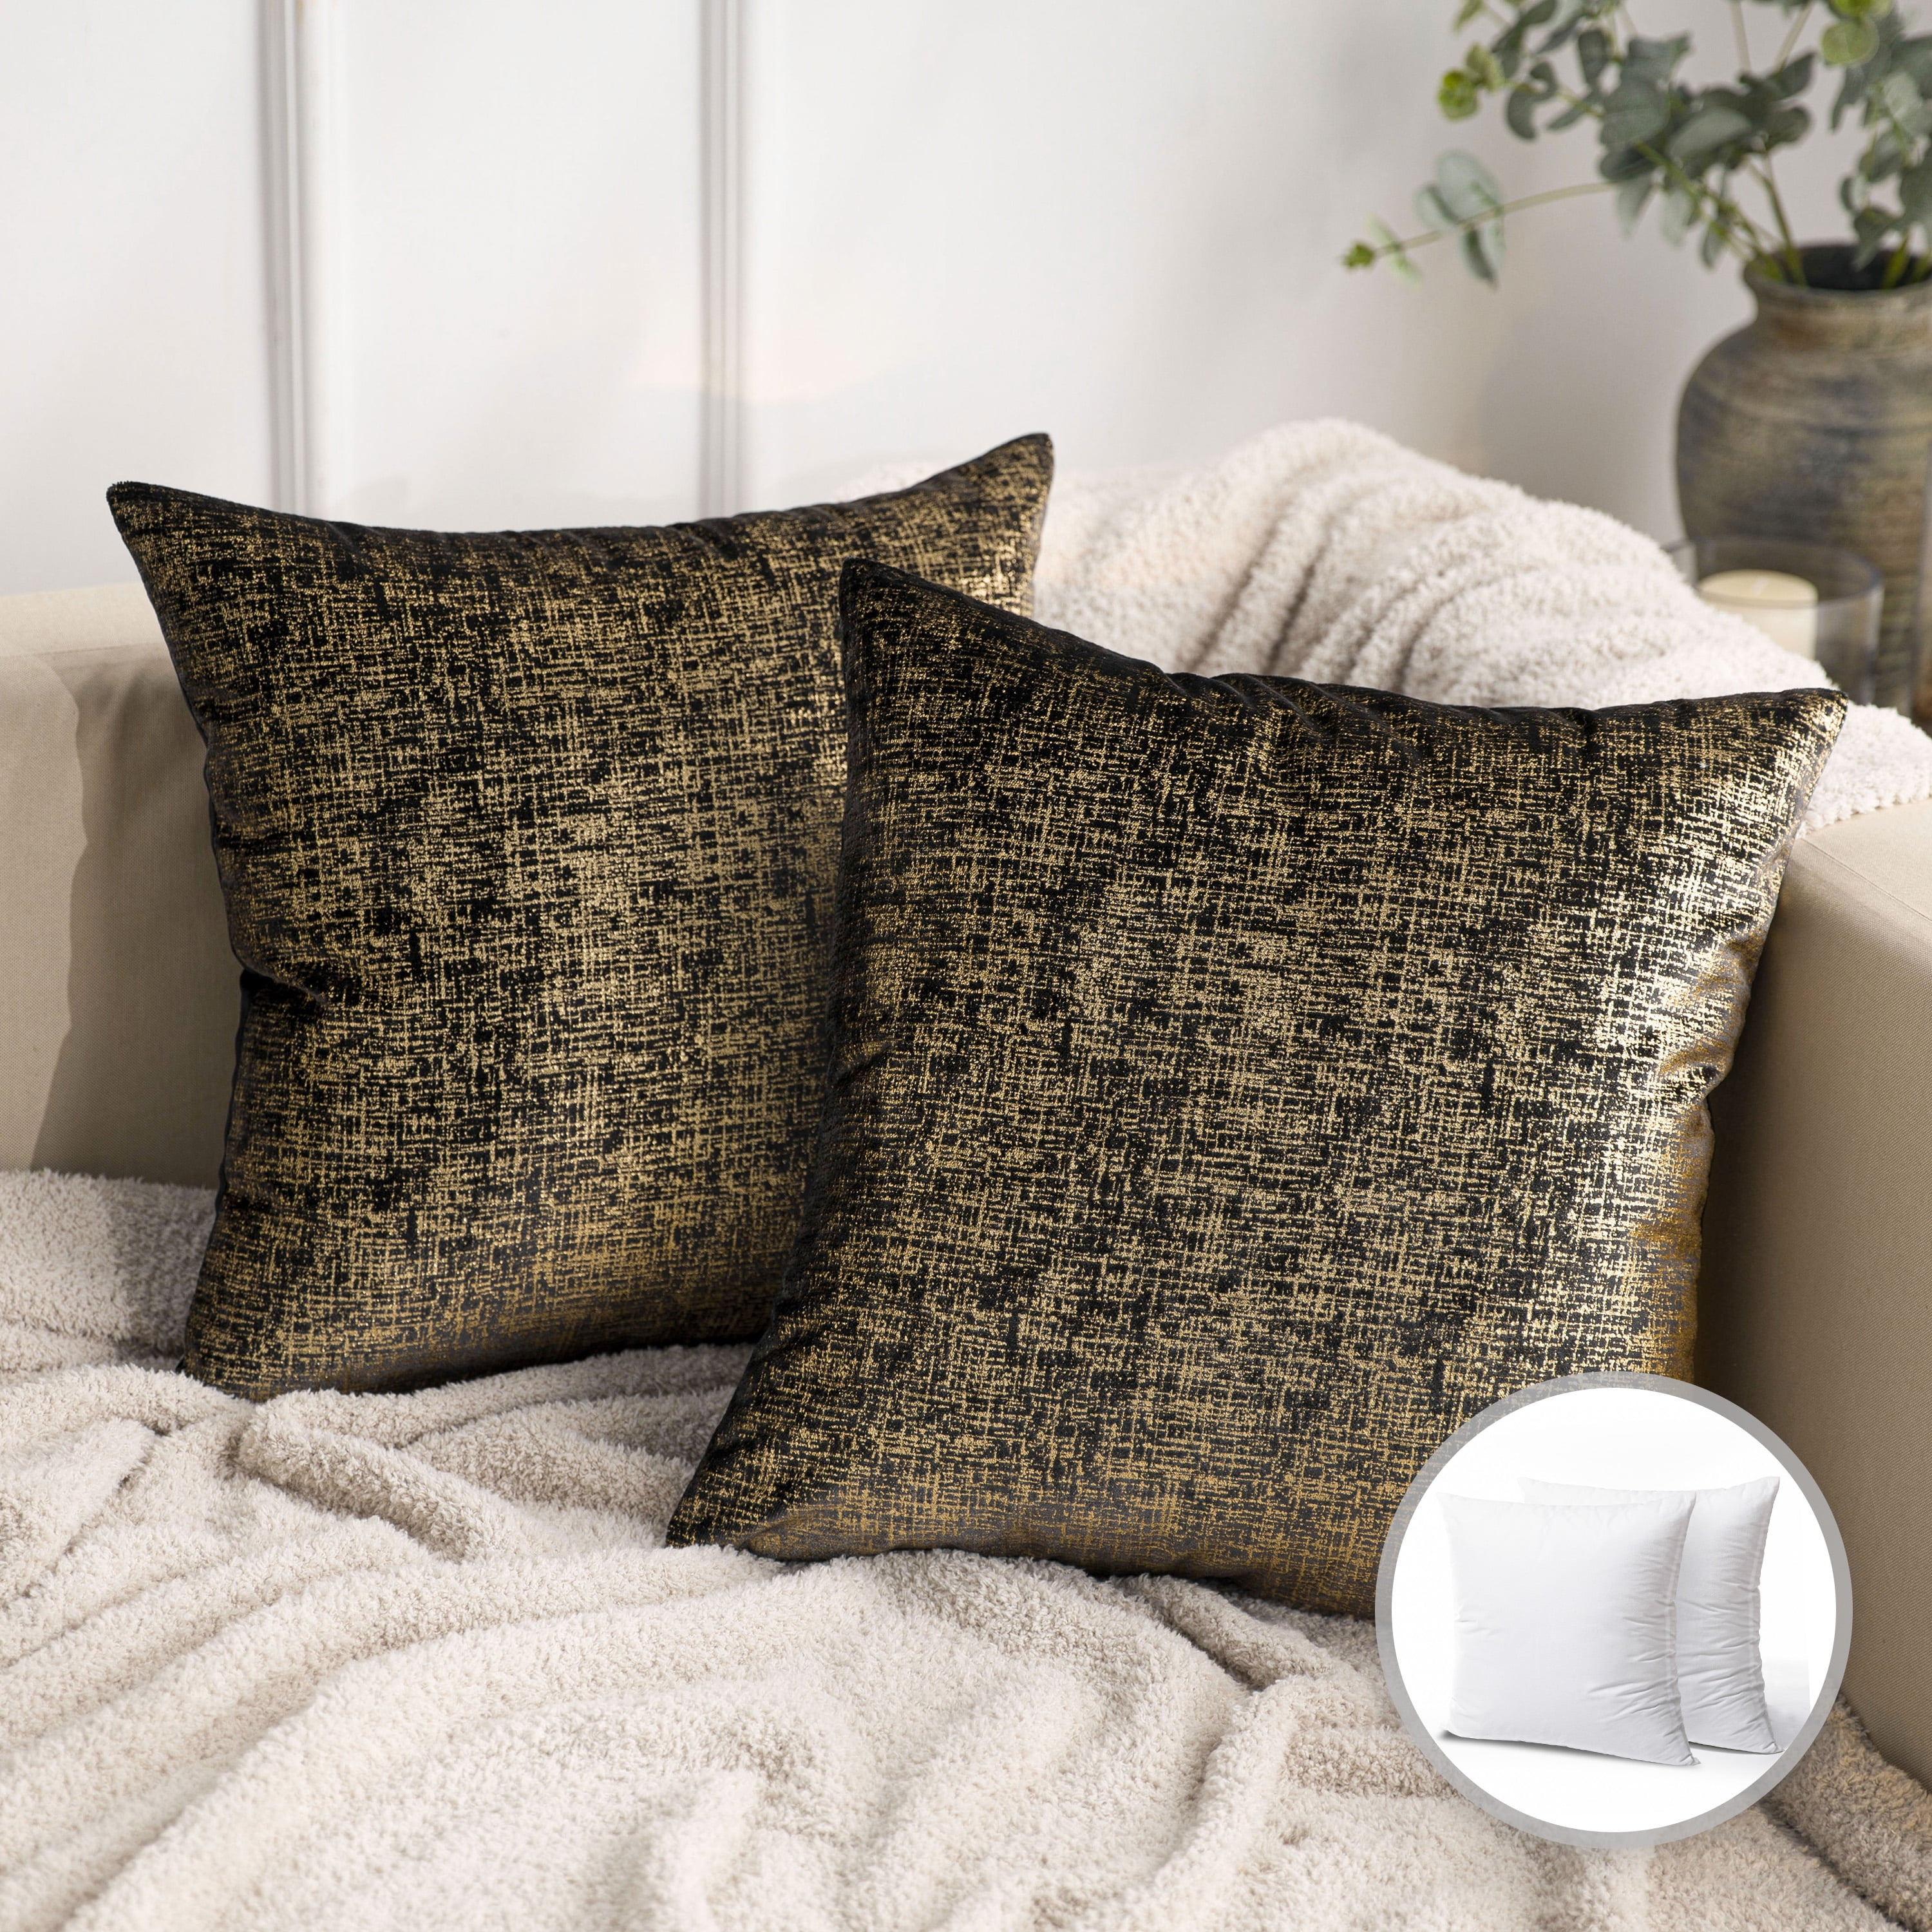 20x20 Oversized Square Tufted Floor Pillow in Faux Velvet Fabric - Sweet  Home Collection, Black, 2 Pack